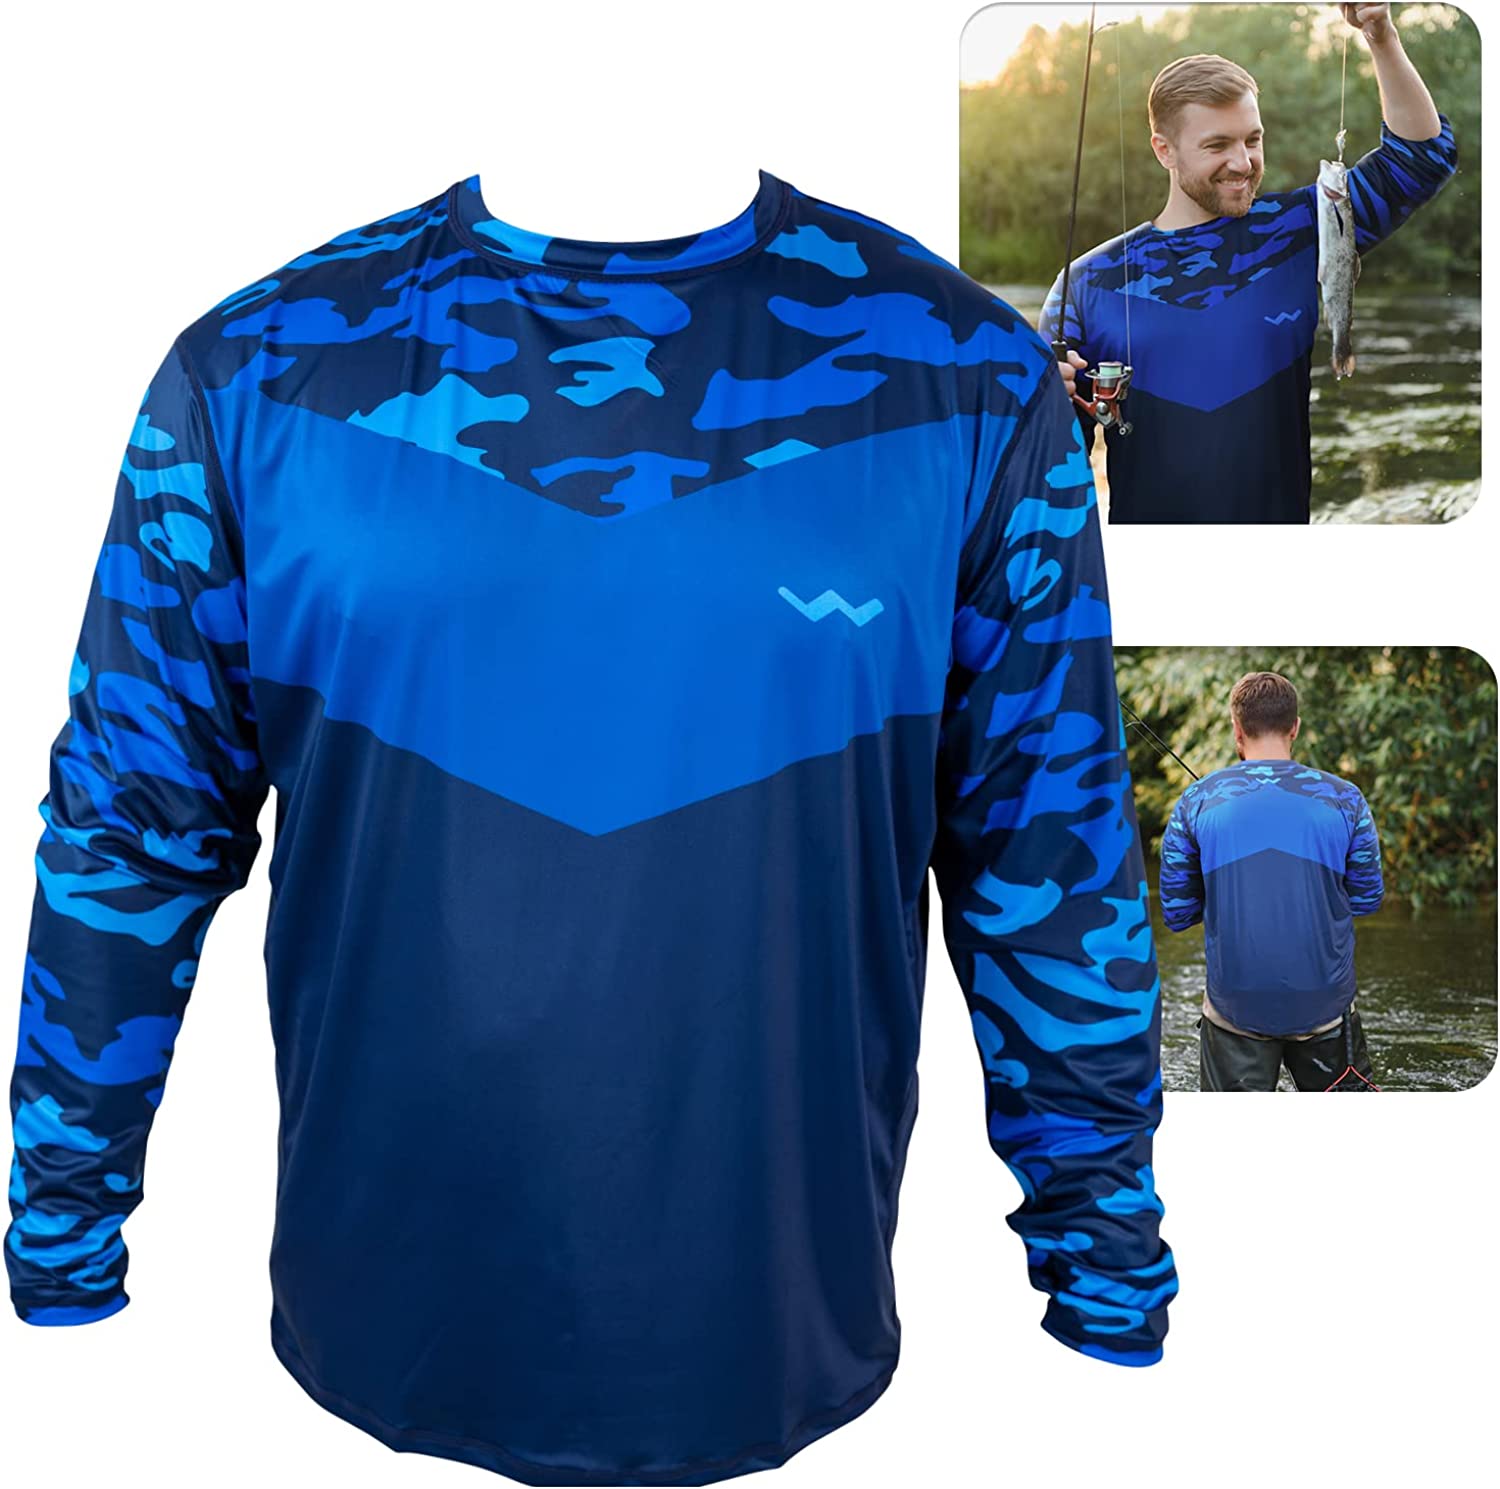 UPF50+ Long Sleeve Fishing Shirts for Men - Vented Sides, Light Weight,  Wicking